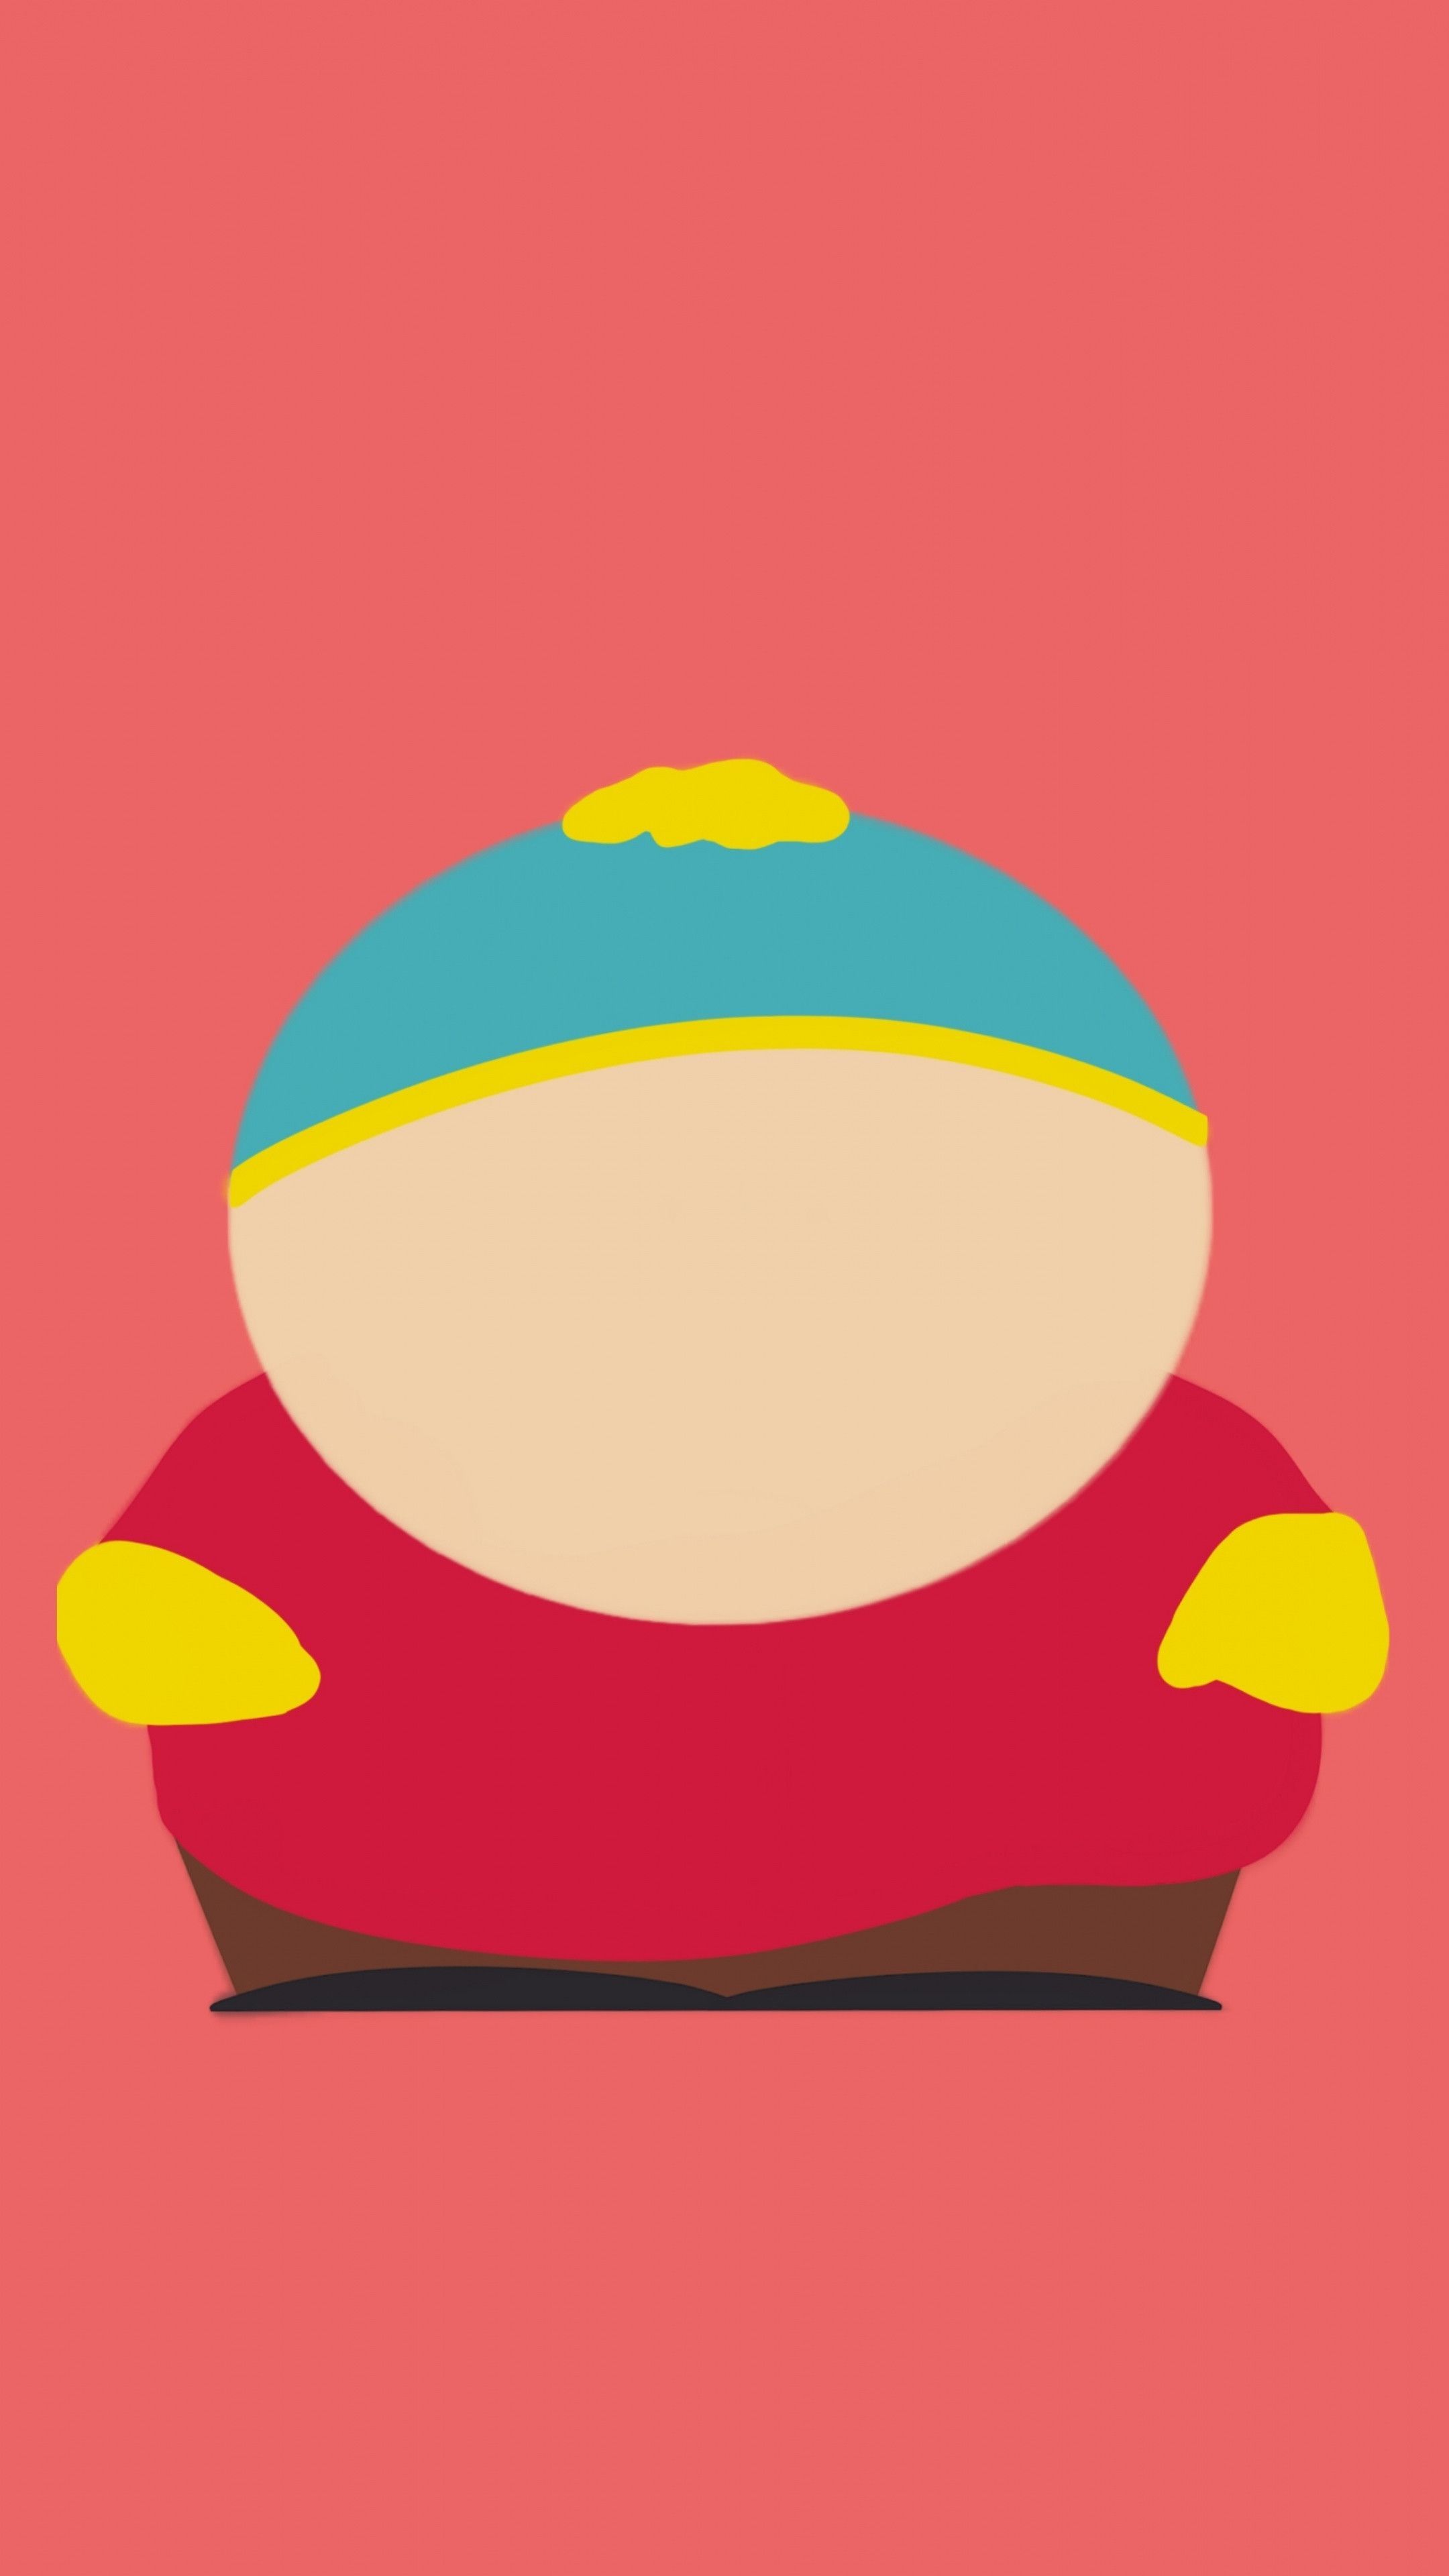 Mobile wallpaper South Park Tv Show Eric Cartman Wendy Testaburger  1171771 download the picture for free